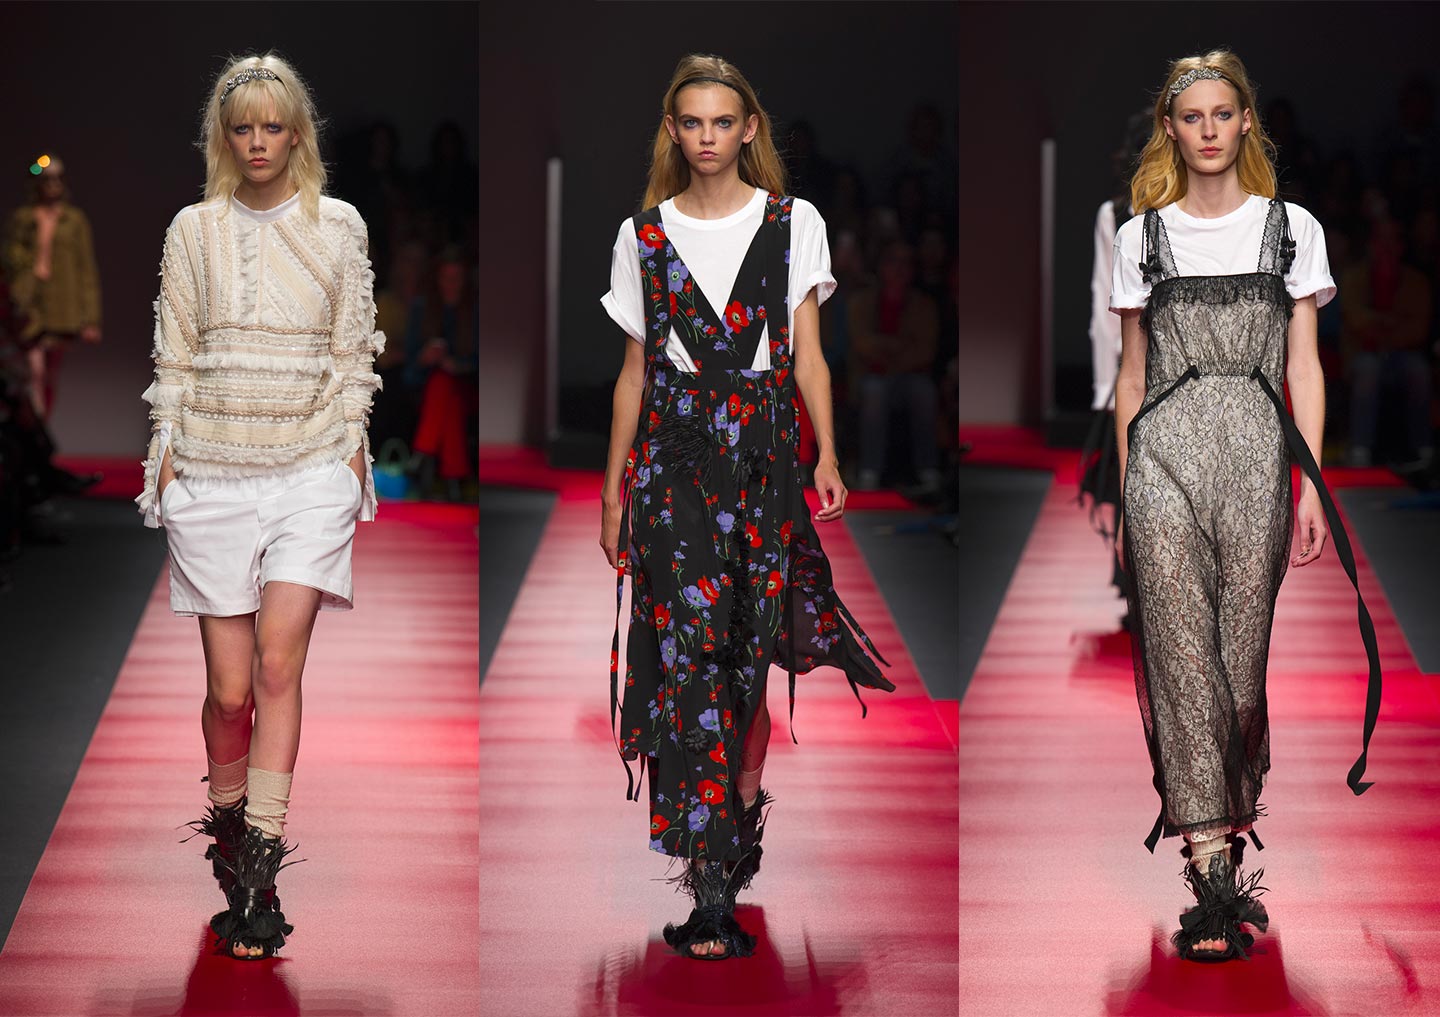 Looks from the N°21 spring-summer 2016 fashion show by Alessandro Dell'Acqua